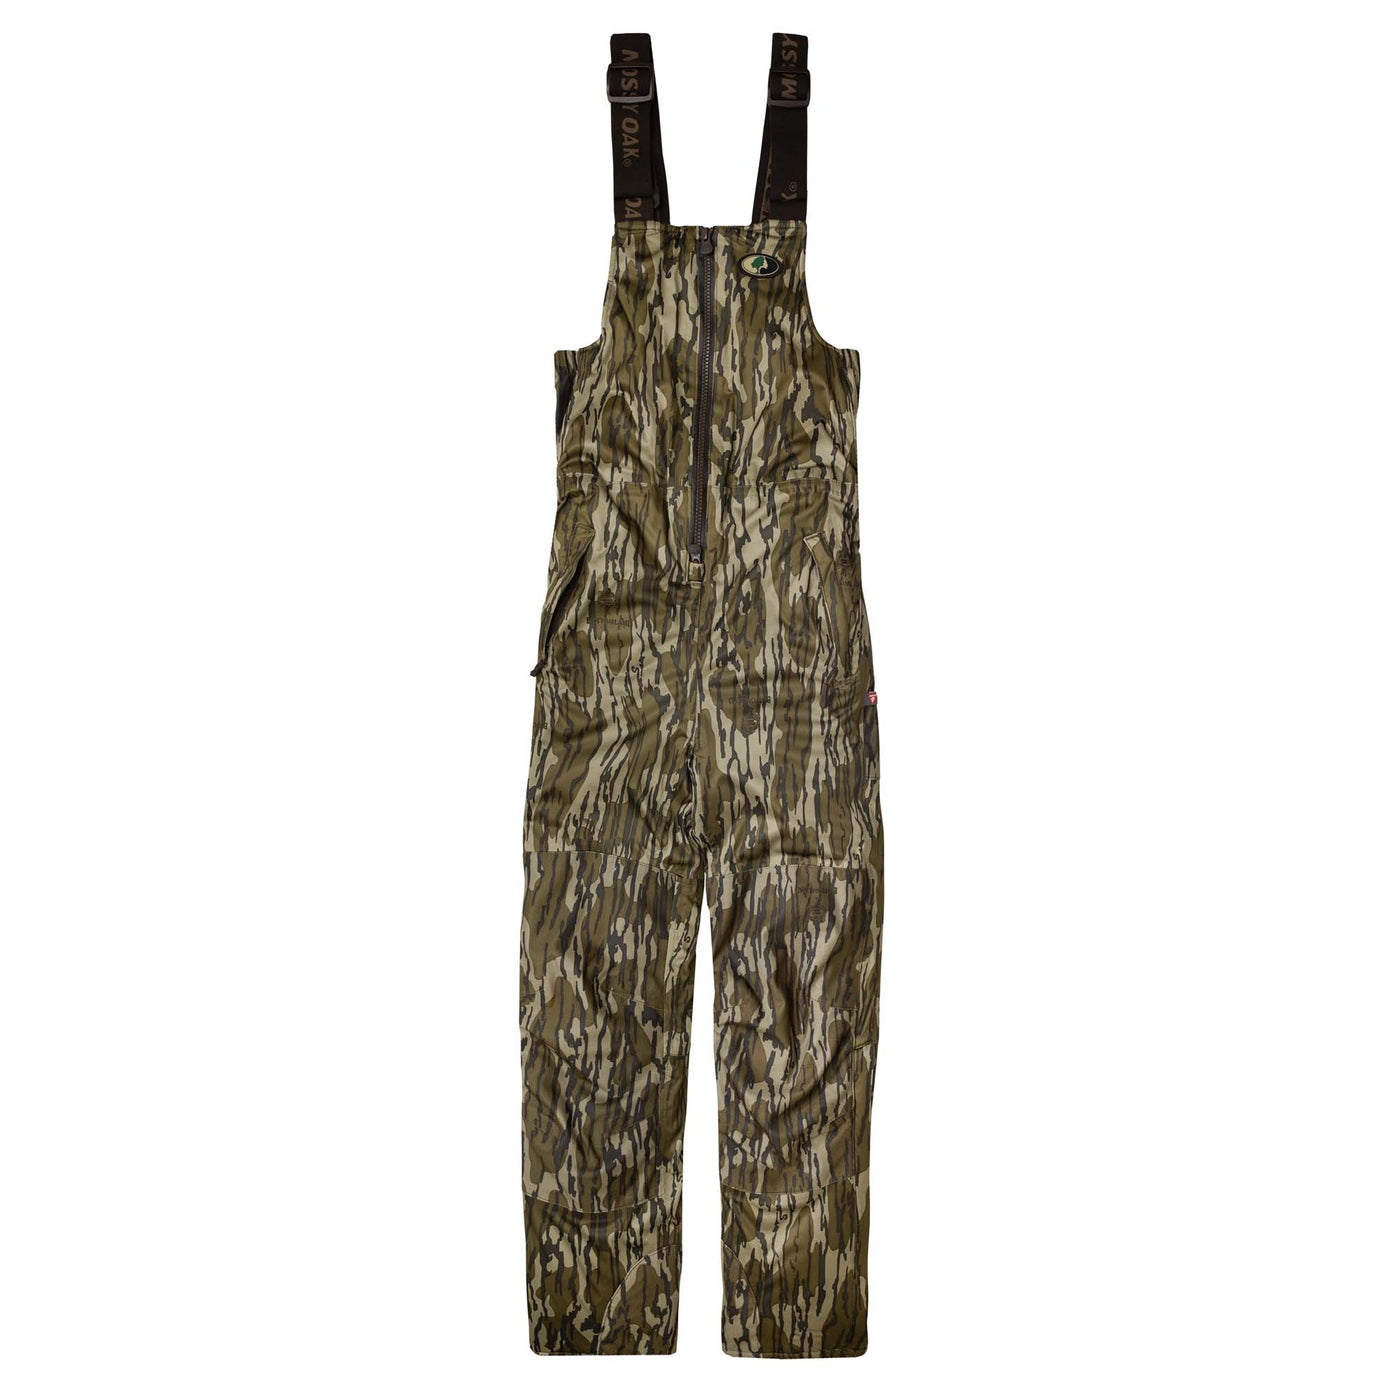 Mossy Oak Youth WPB Insulated Bib Overall